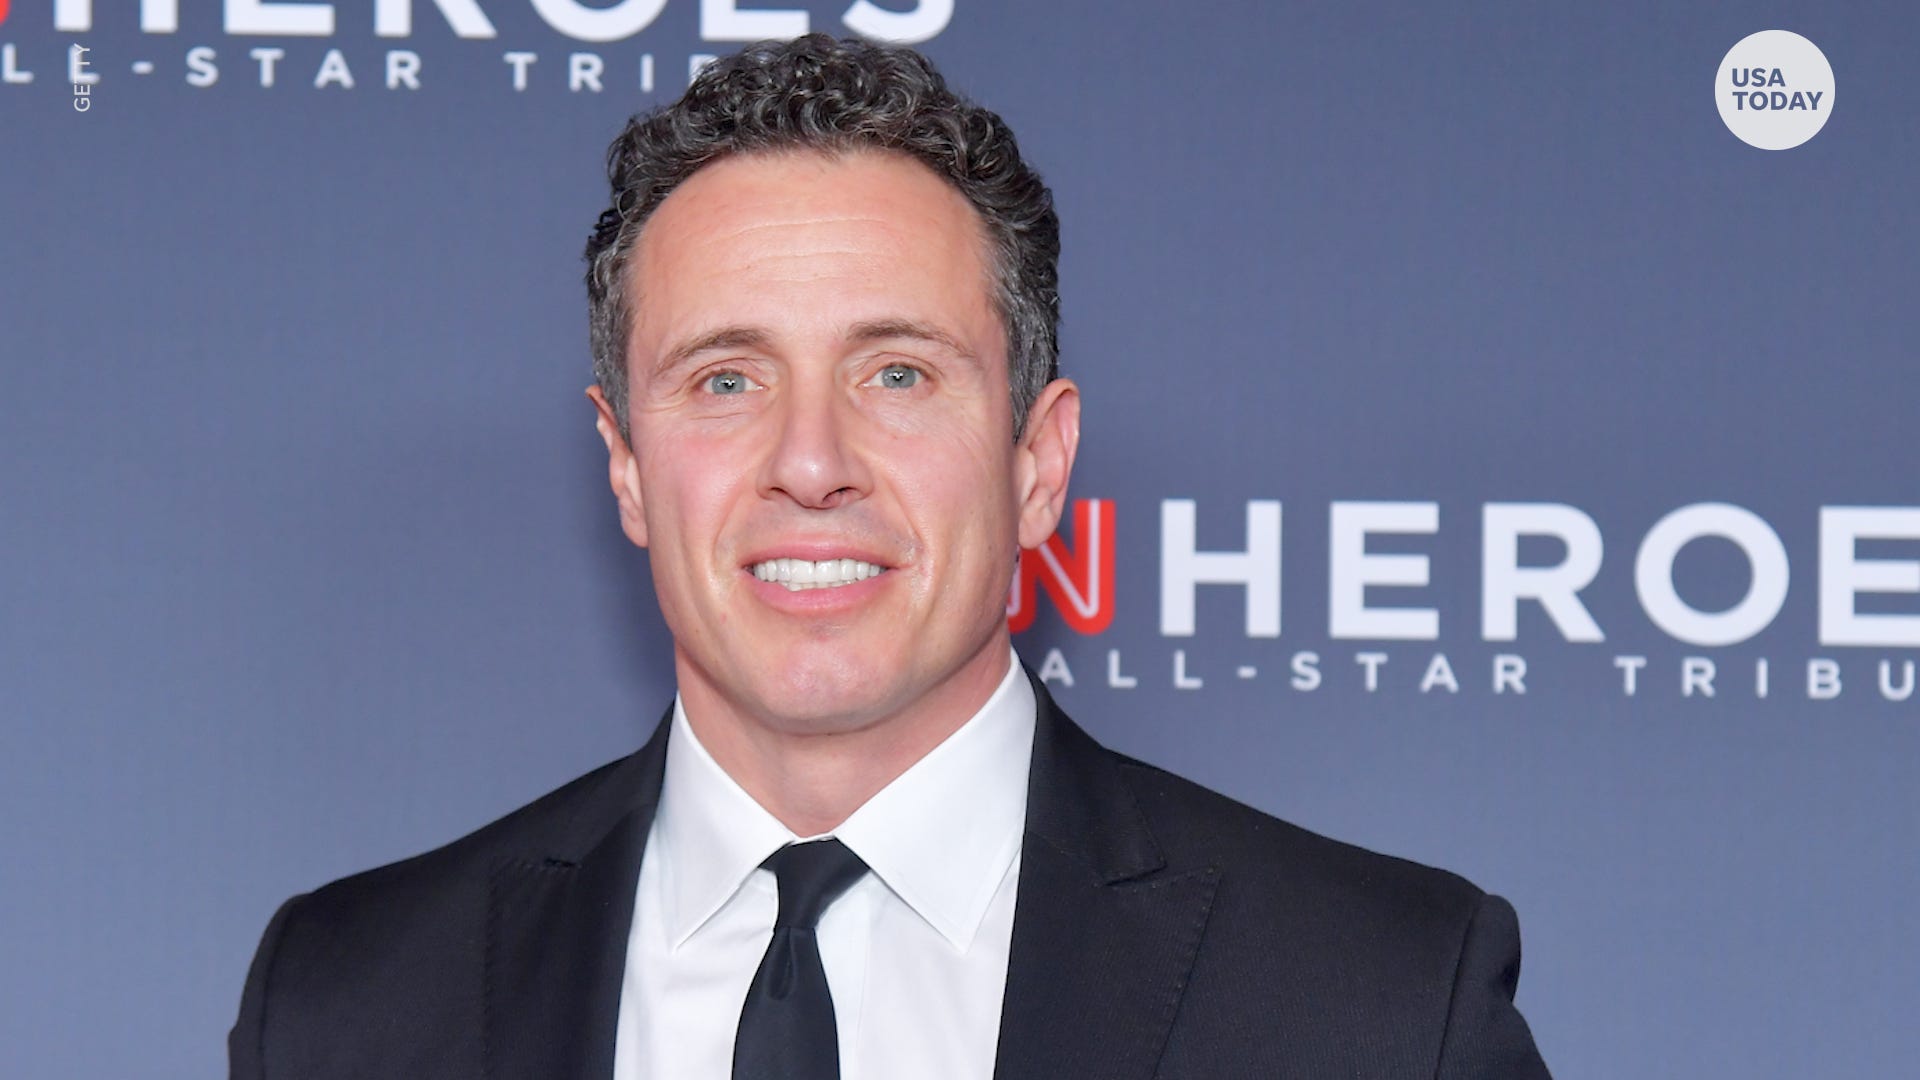 Chris Cuomo wearing a suit on CNN Heroes All-Star tribute